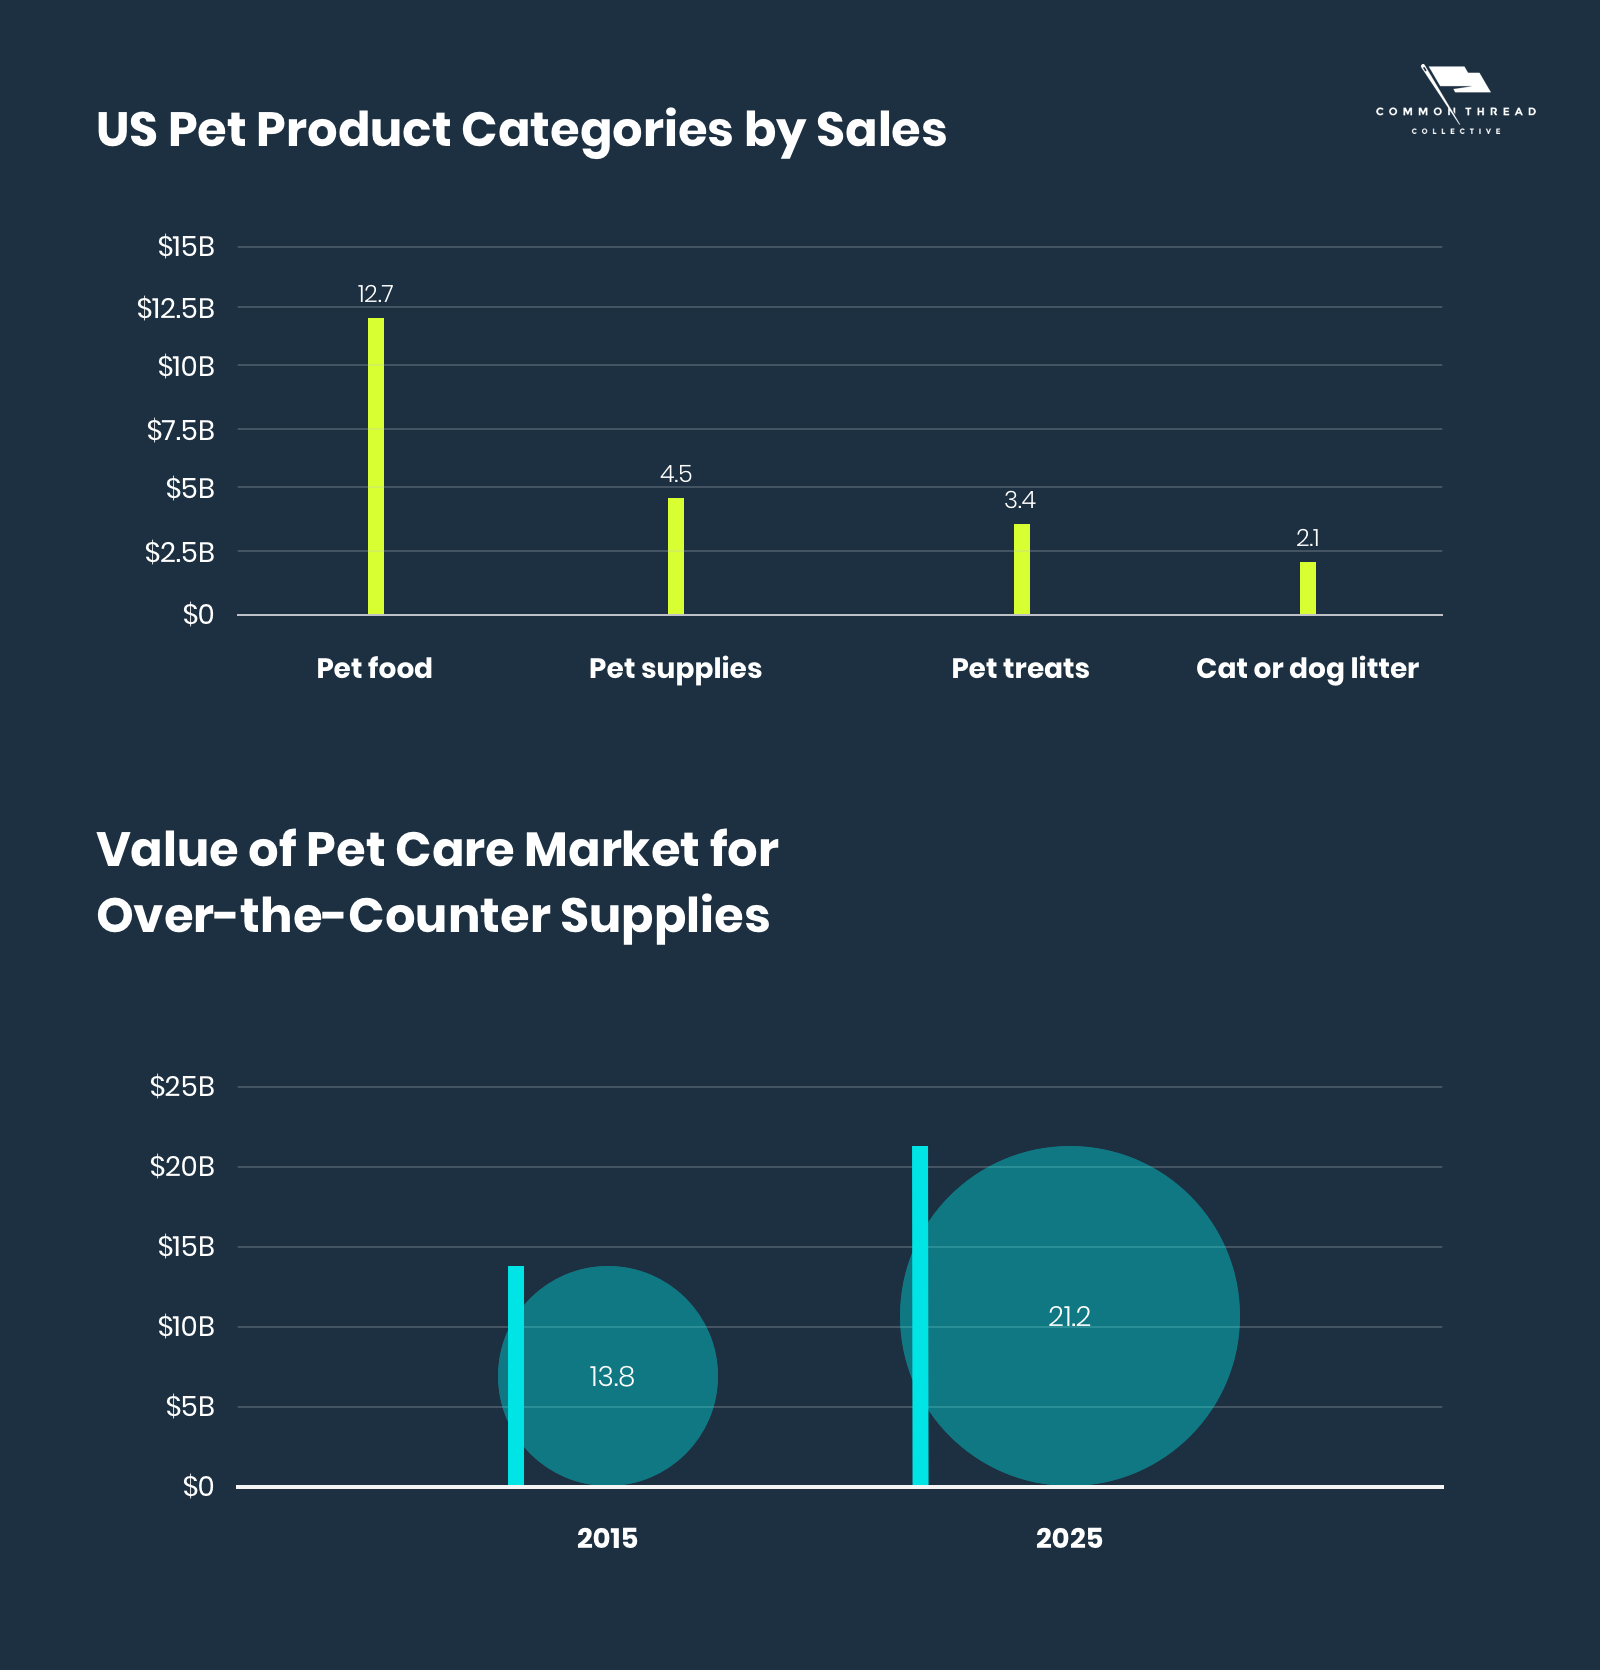 US Pet Product Categories by Sales and Value of Over the Counter Supplies